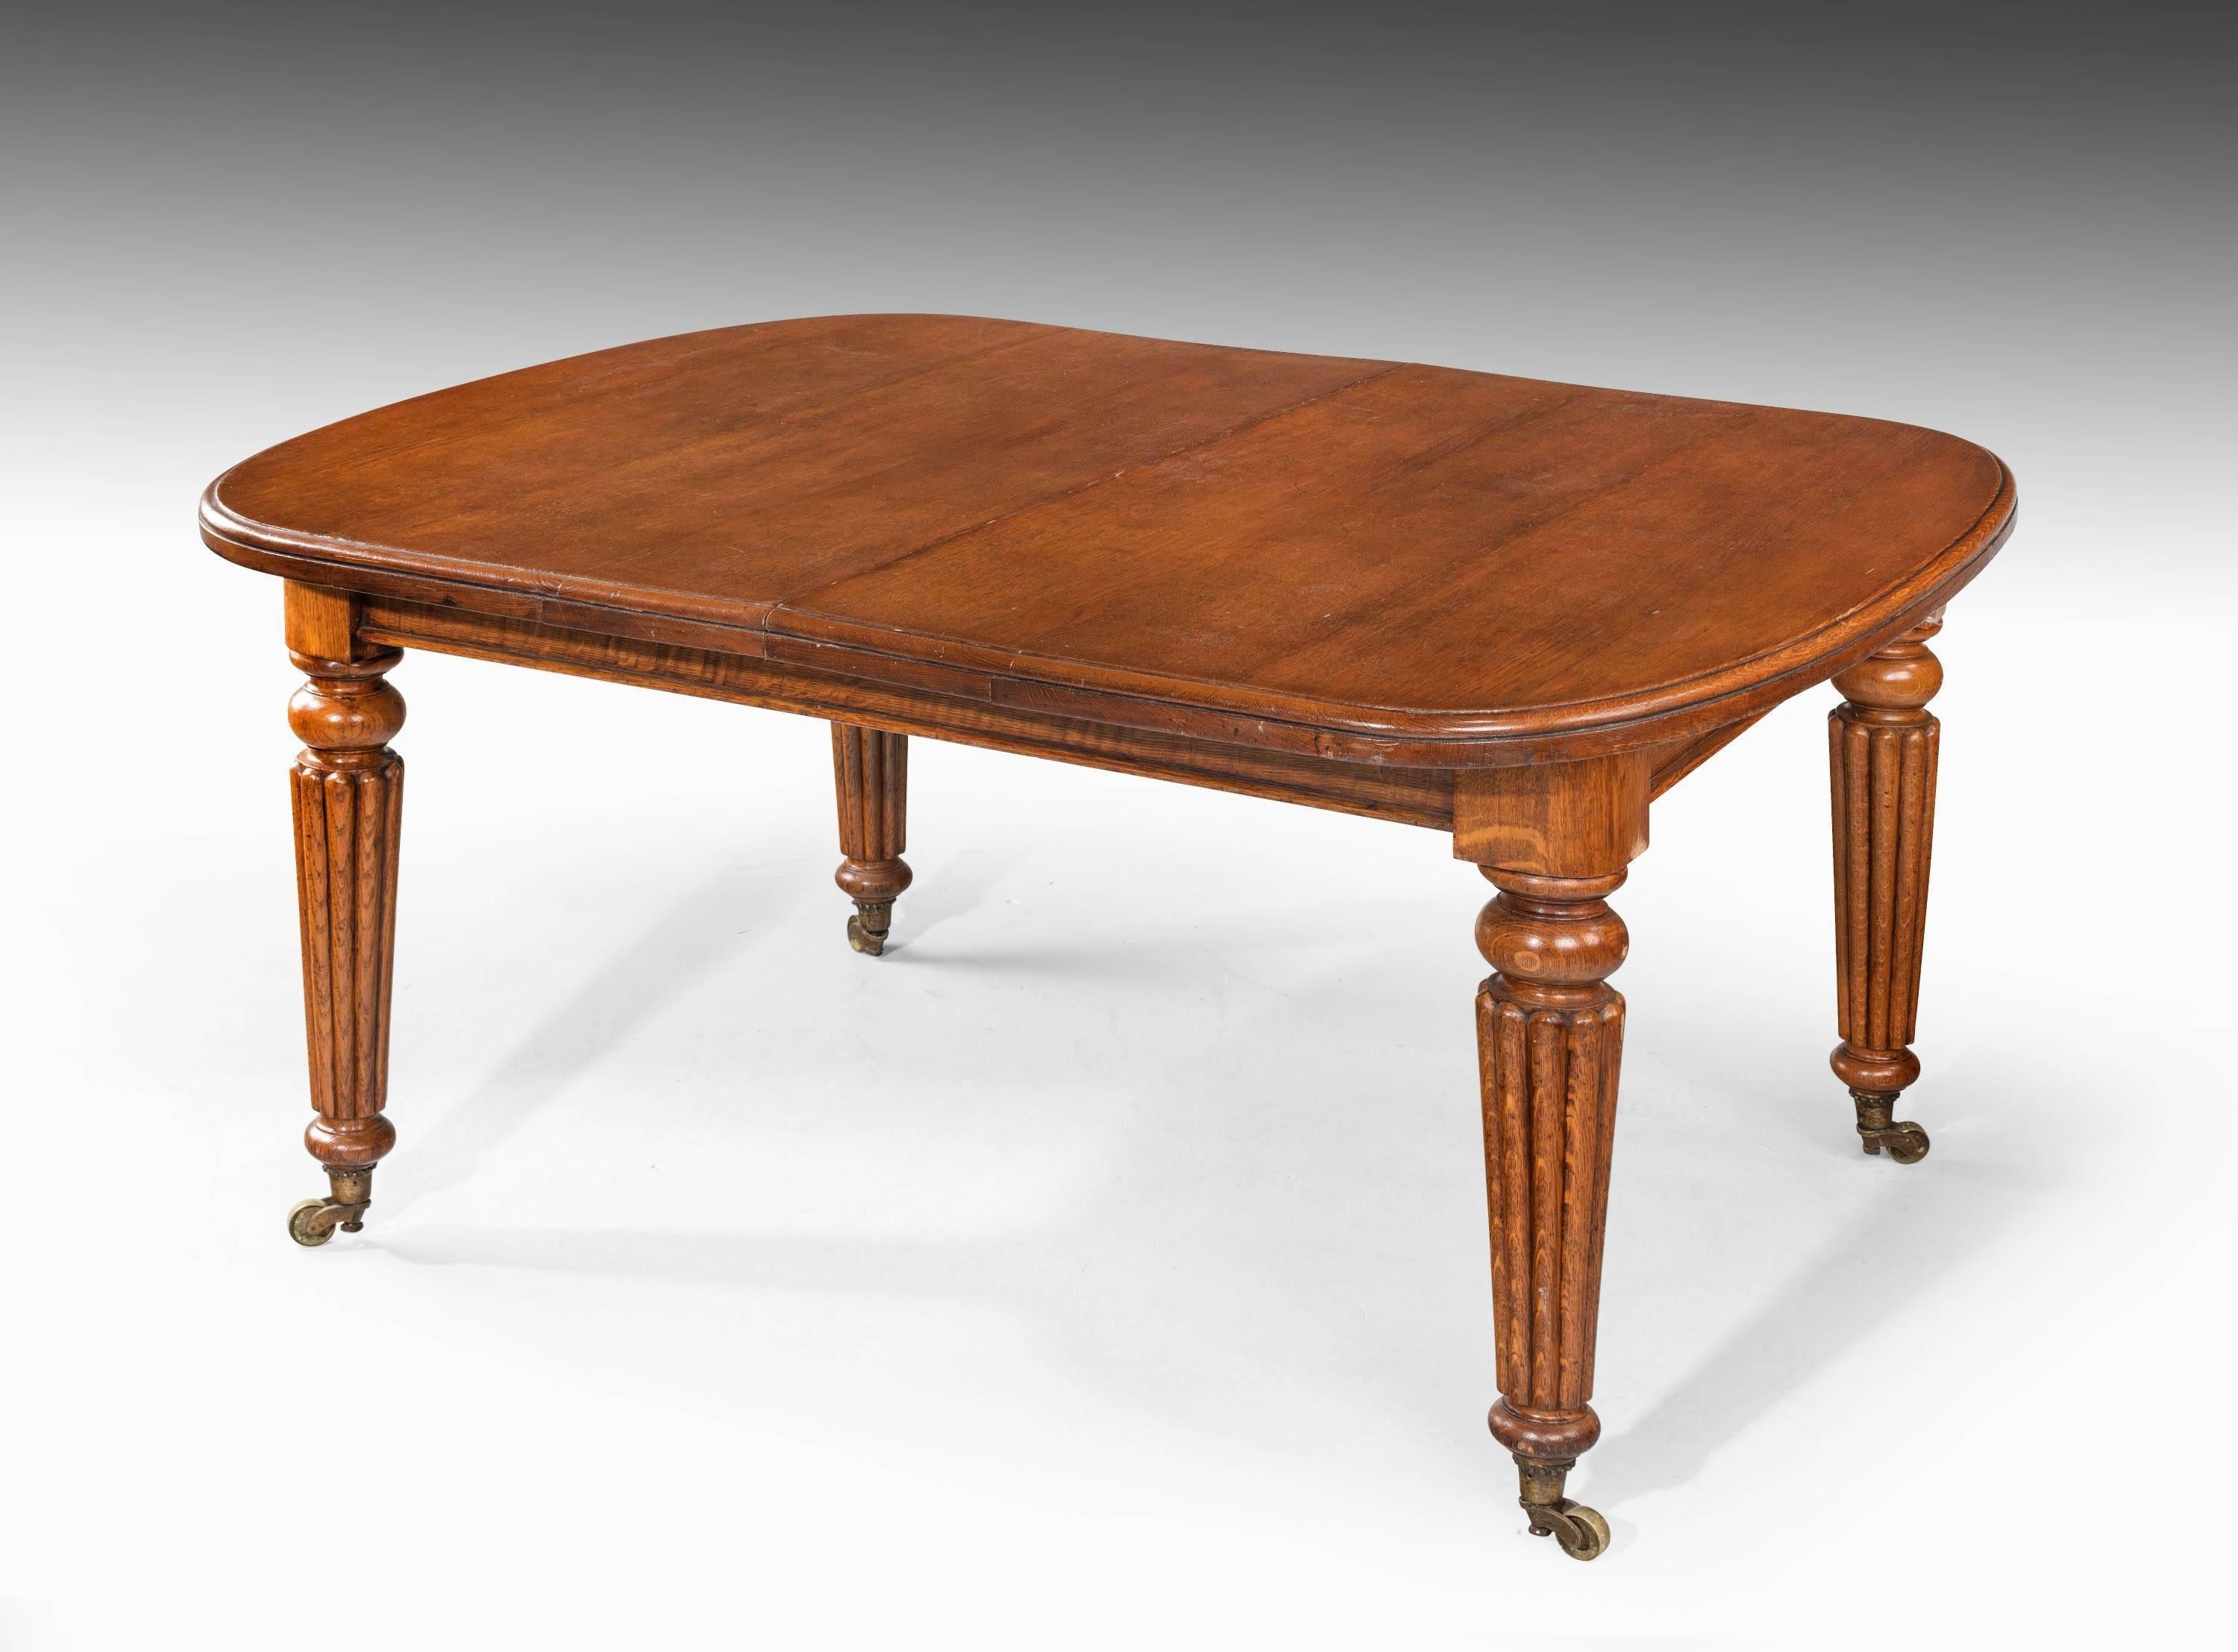 Late Regency Period Mahogany Extending Dining Table with Reeded Decoration 2